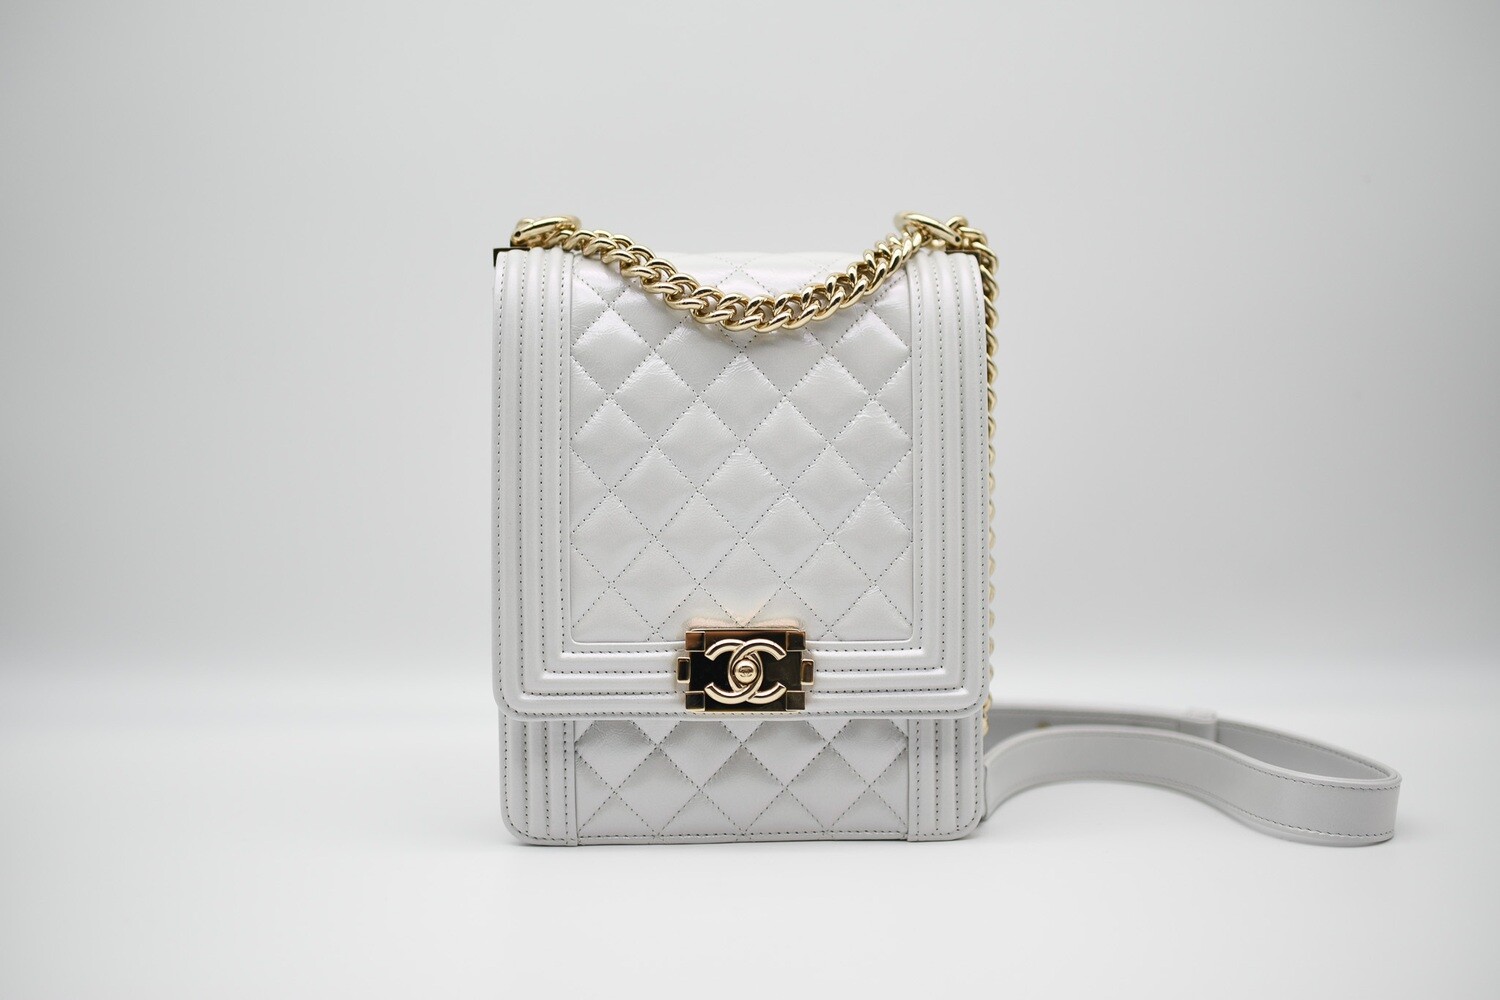 Chanel Boy Bag North South, White Iridescent with Shiny Gold Hardware, Like  New in Box GA006 - Julia Rose Boston